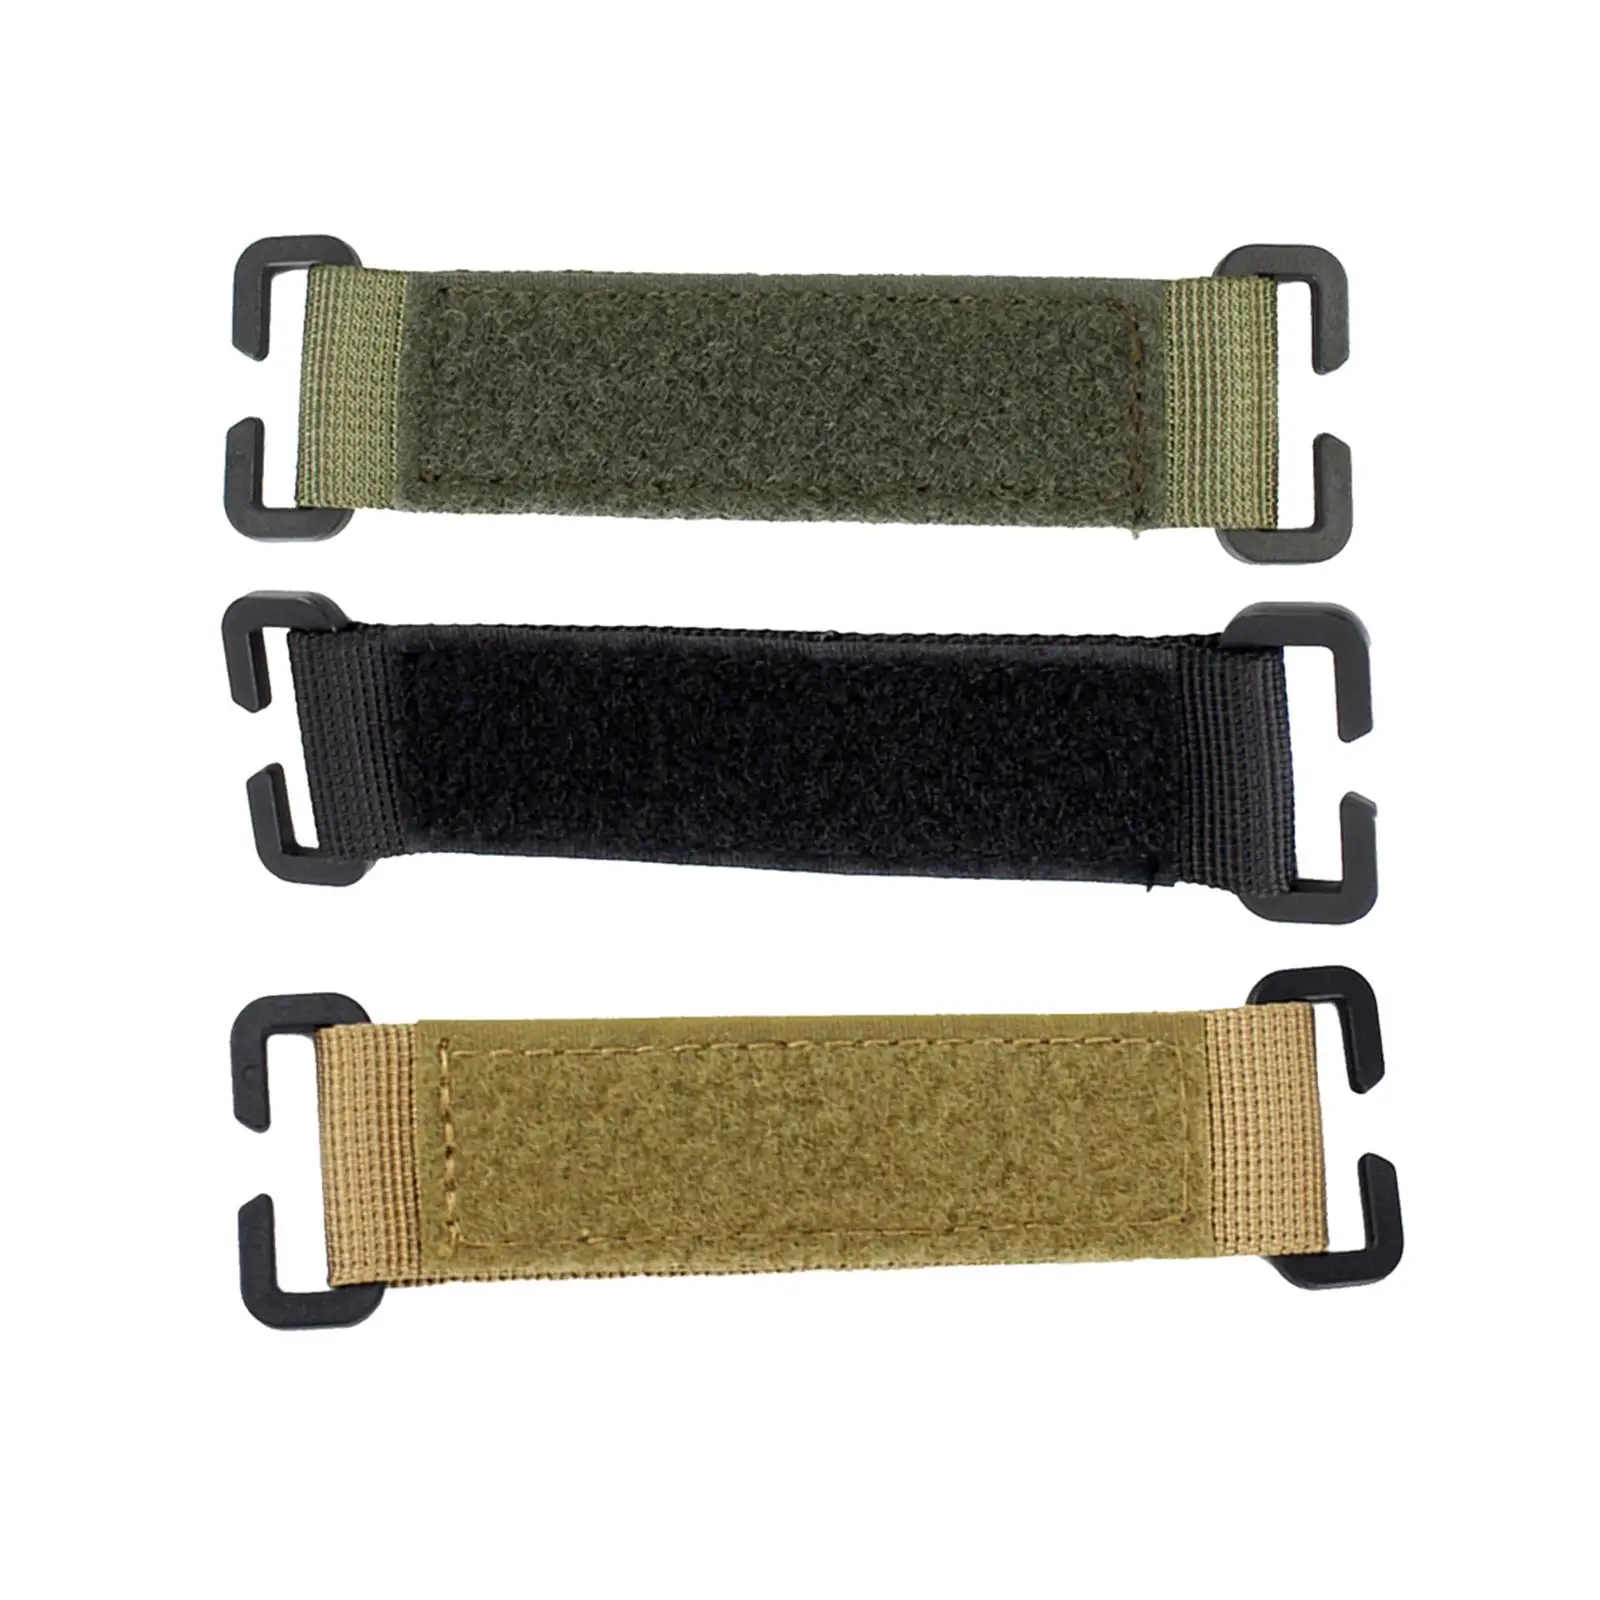 Adhesive Tape Reusable Badges Pad Morale Patches Display Board ID Tag Plank MOLLE System